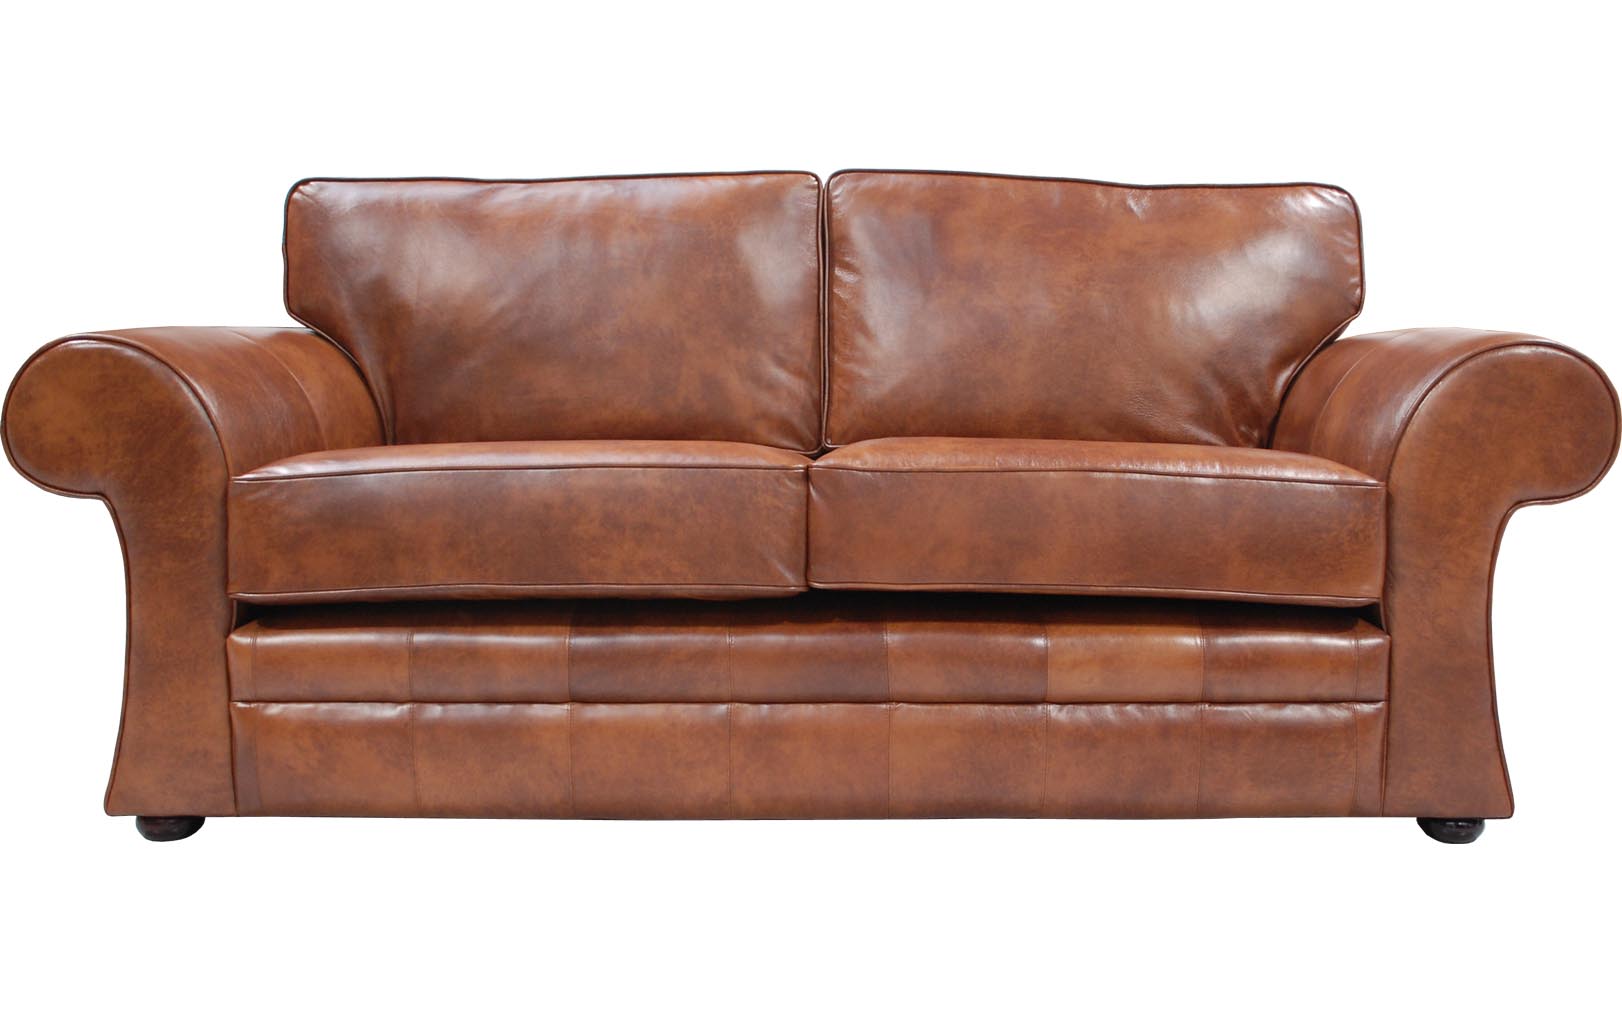 leather sofa bed for sale brisbane